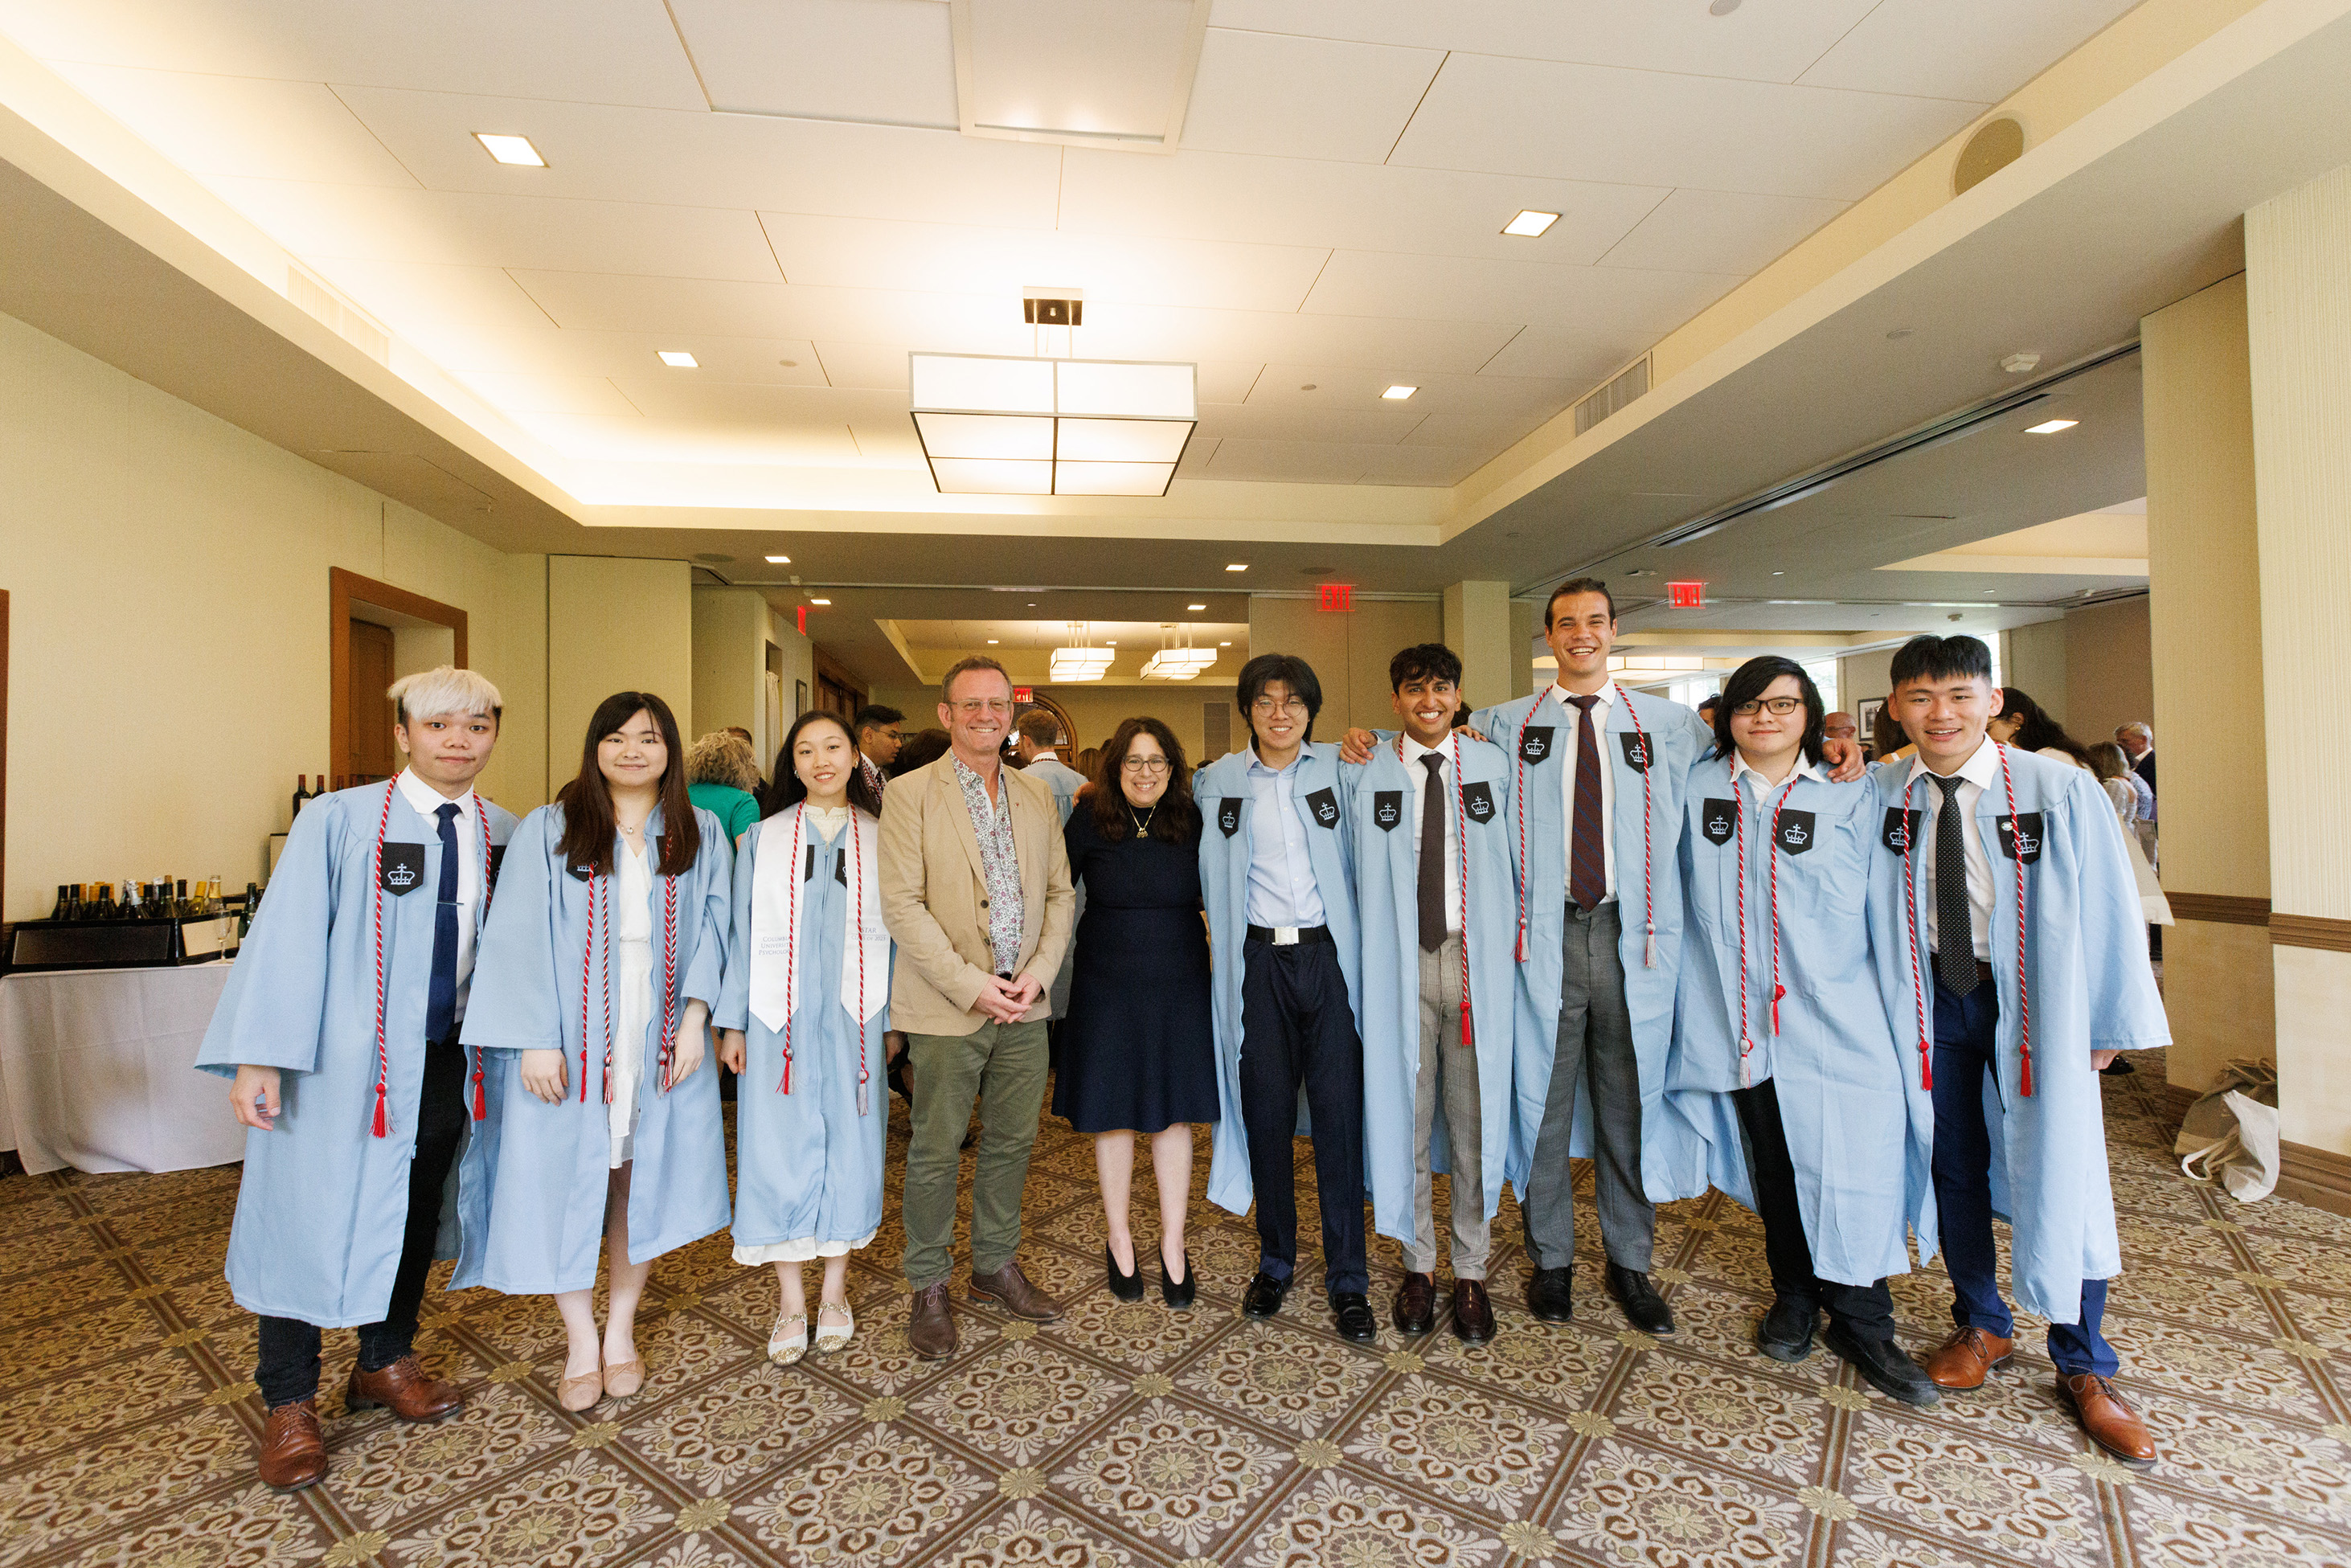 Comings and Goings of Joint Bachelor’s Degree Program between Columbia University and City University of Hong Kong